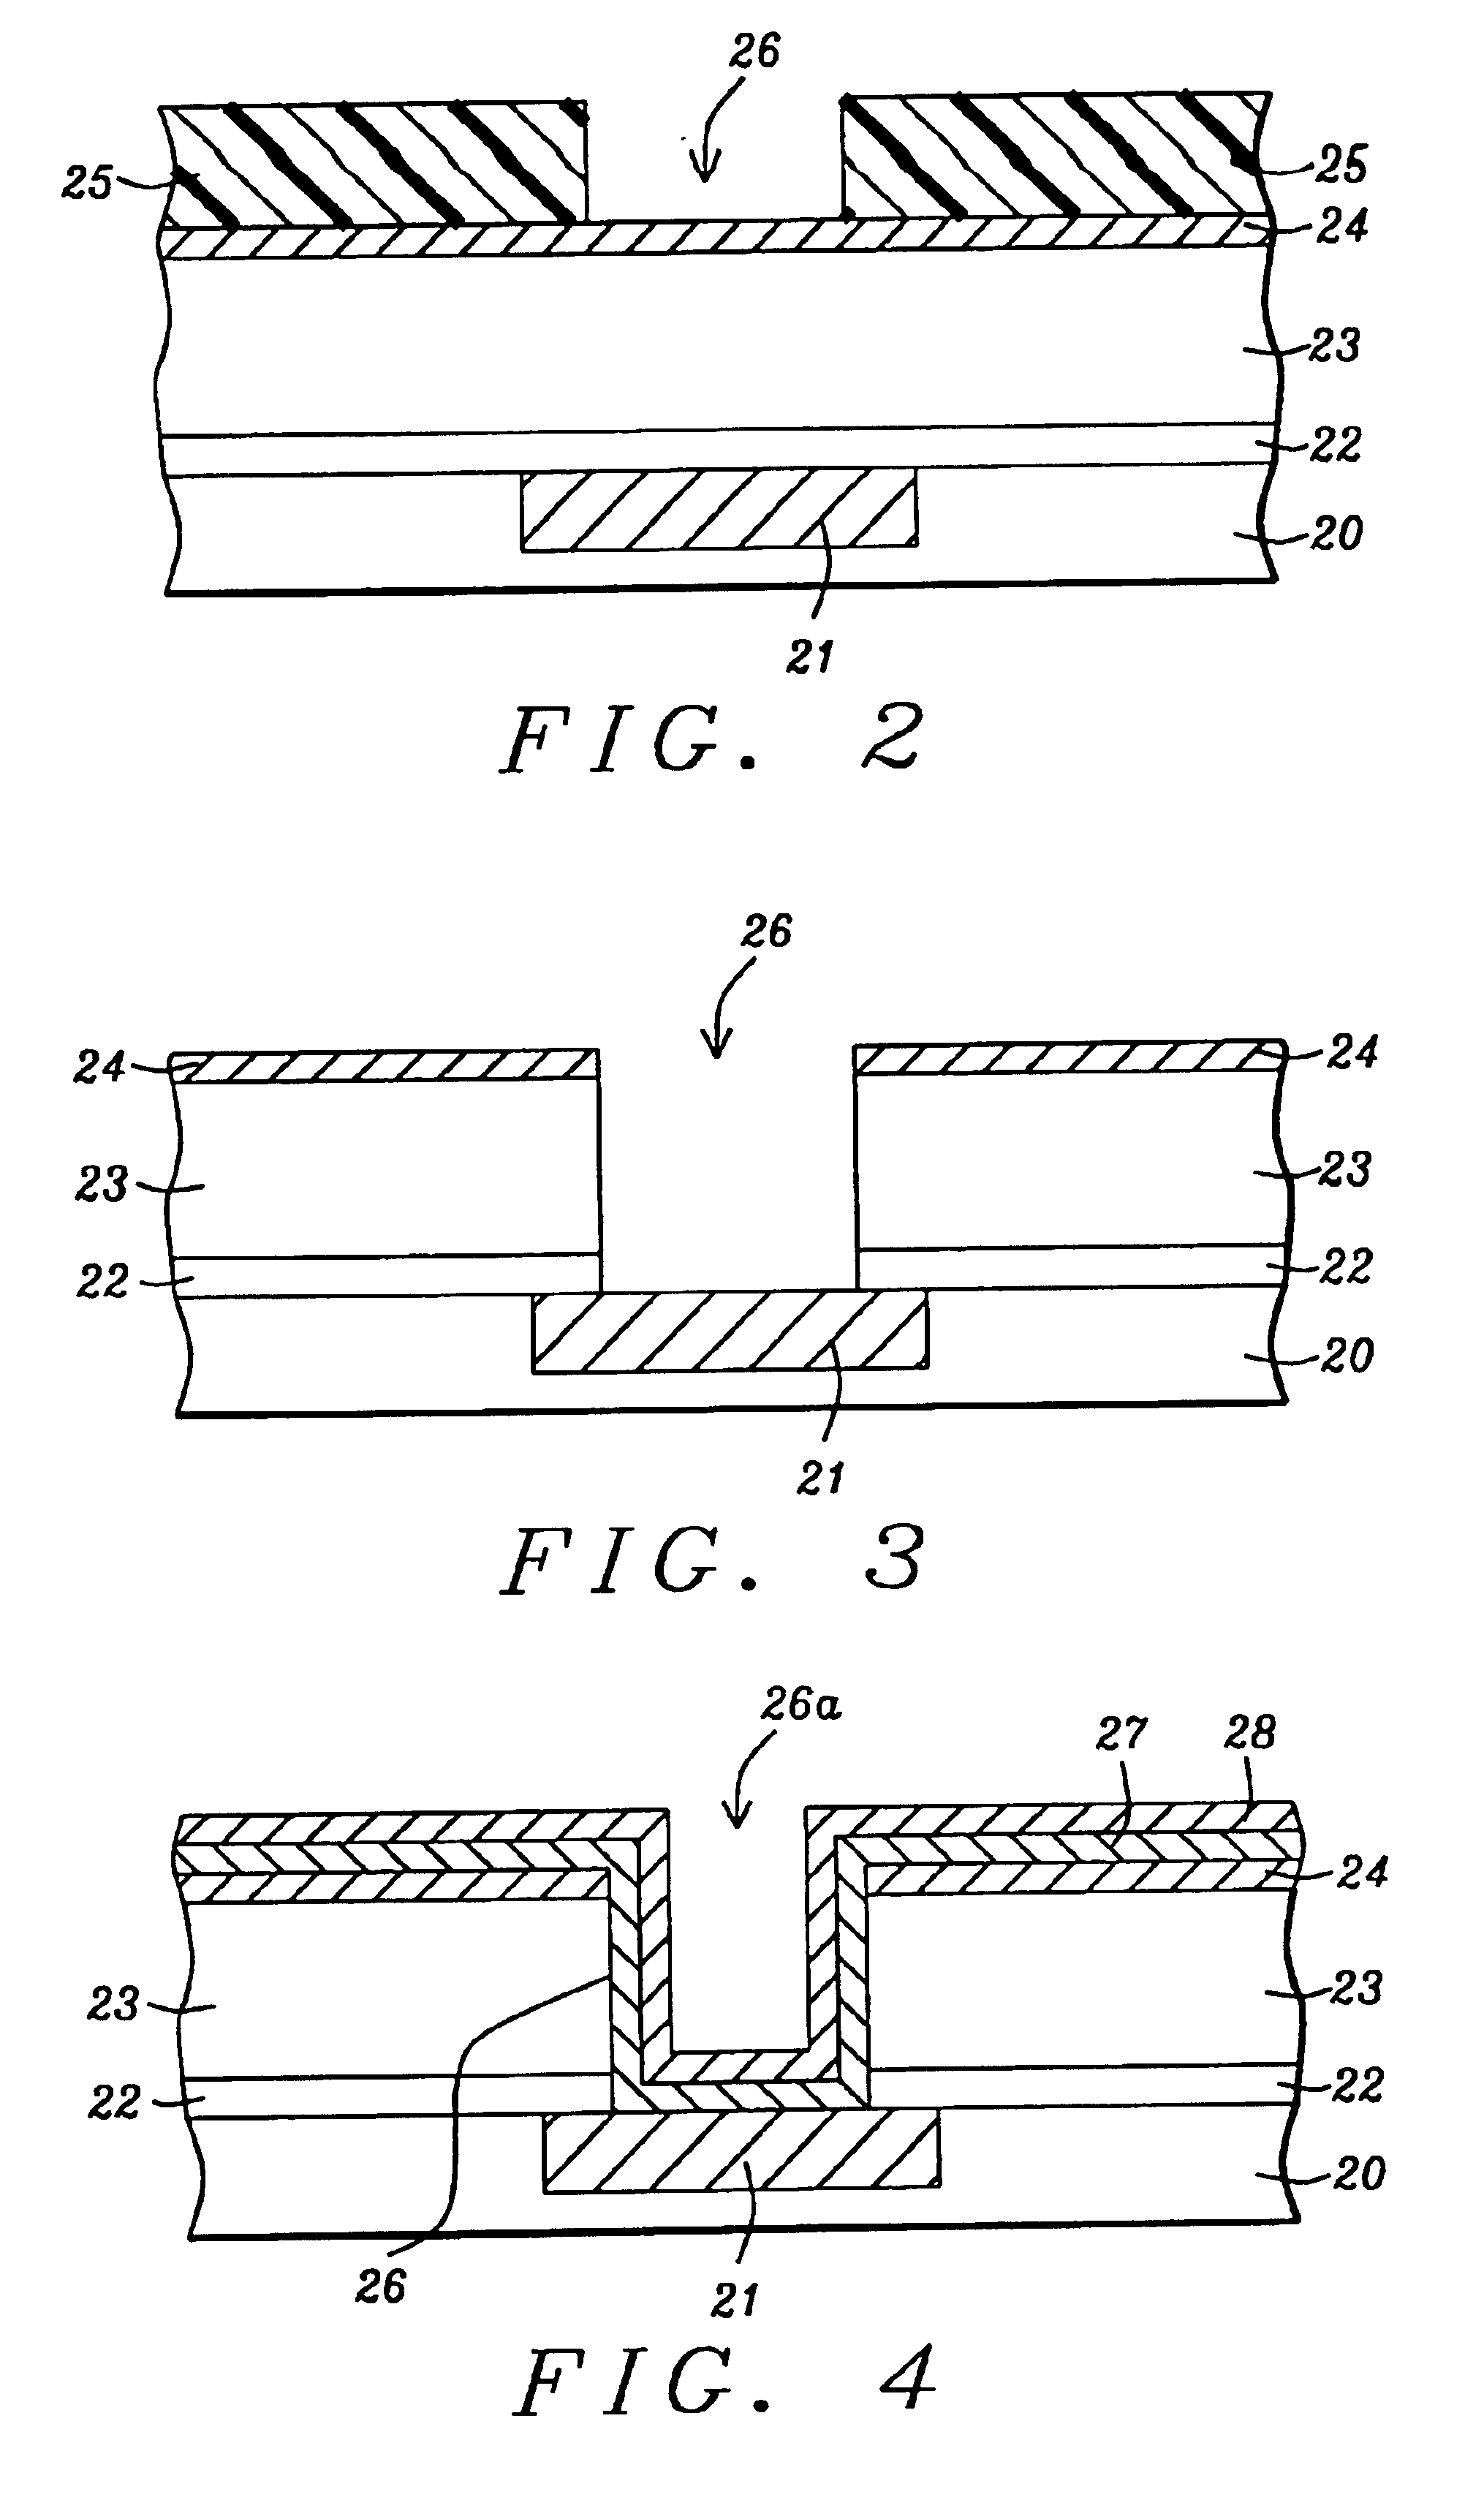 Method of selectively making copper using plating technology